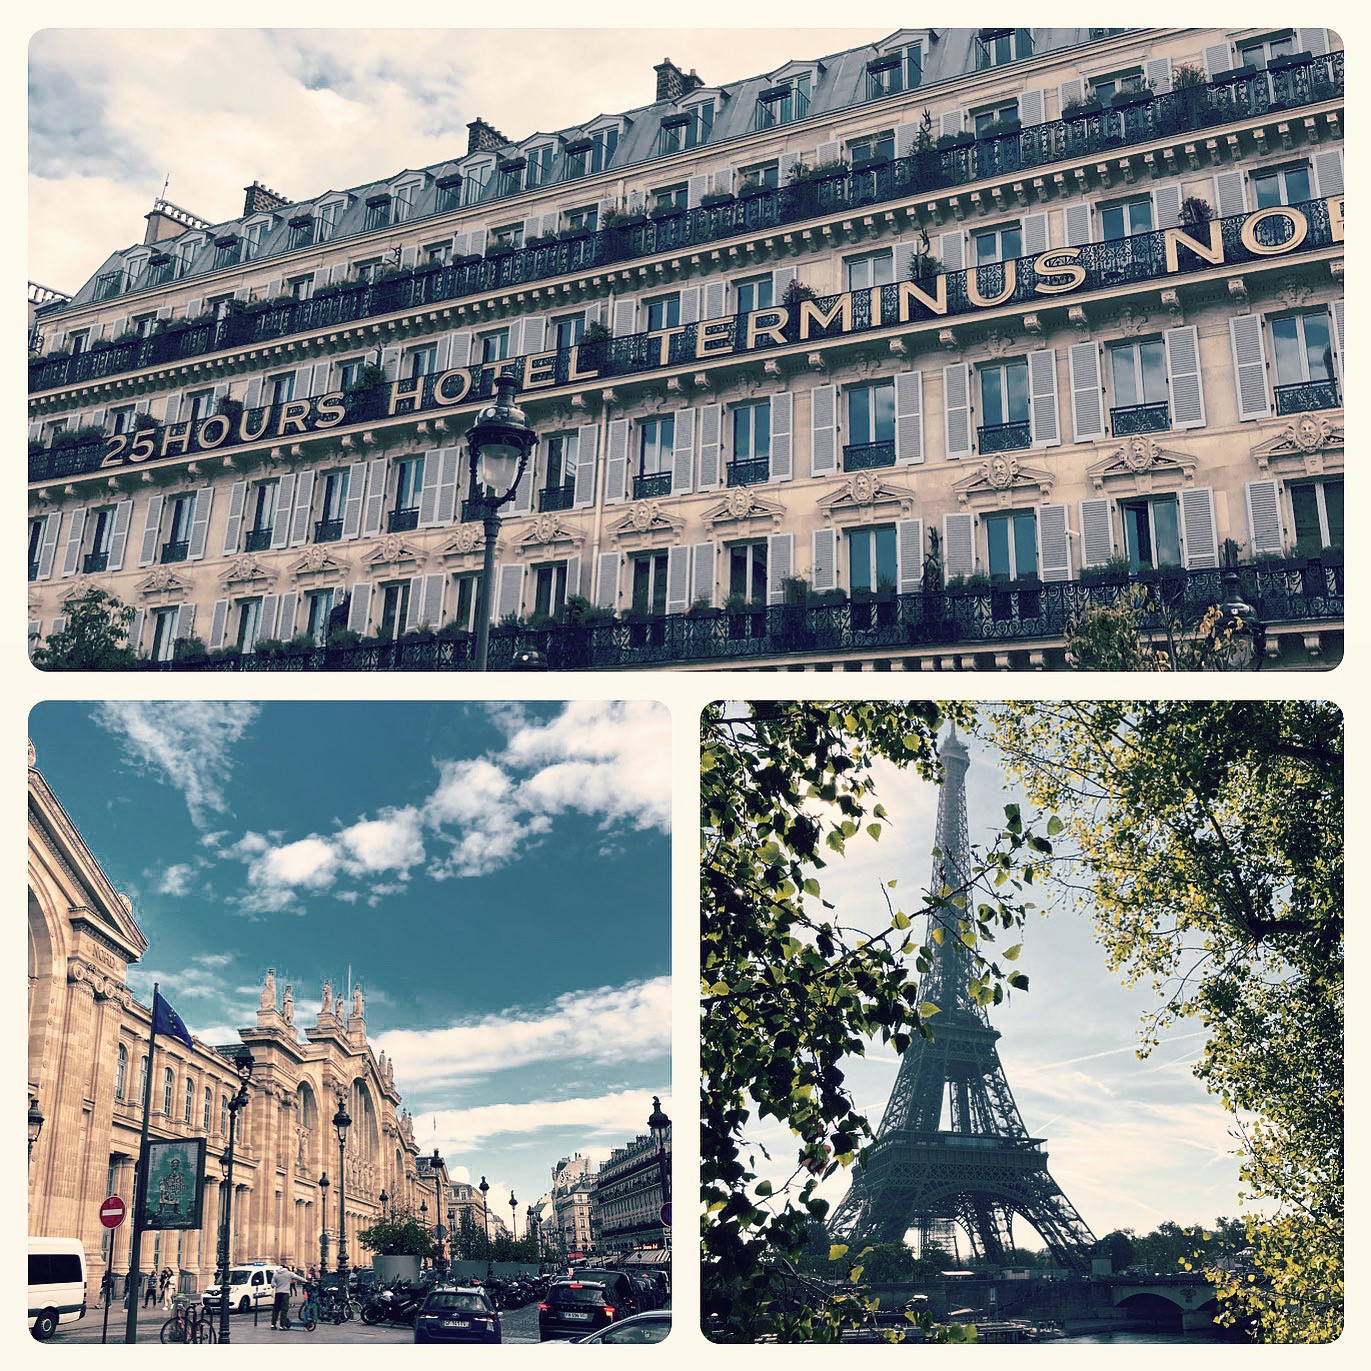 Three small pictures. On the top you can see the front of the 25hours Hotel Terminus at Gare du Nord. On the bottom you see the building of Gare du Nord and a view over the Seine to the Eiffel tower.